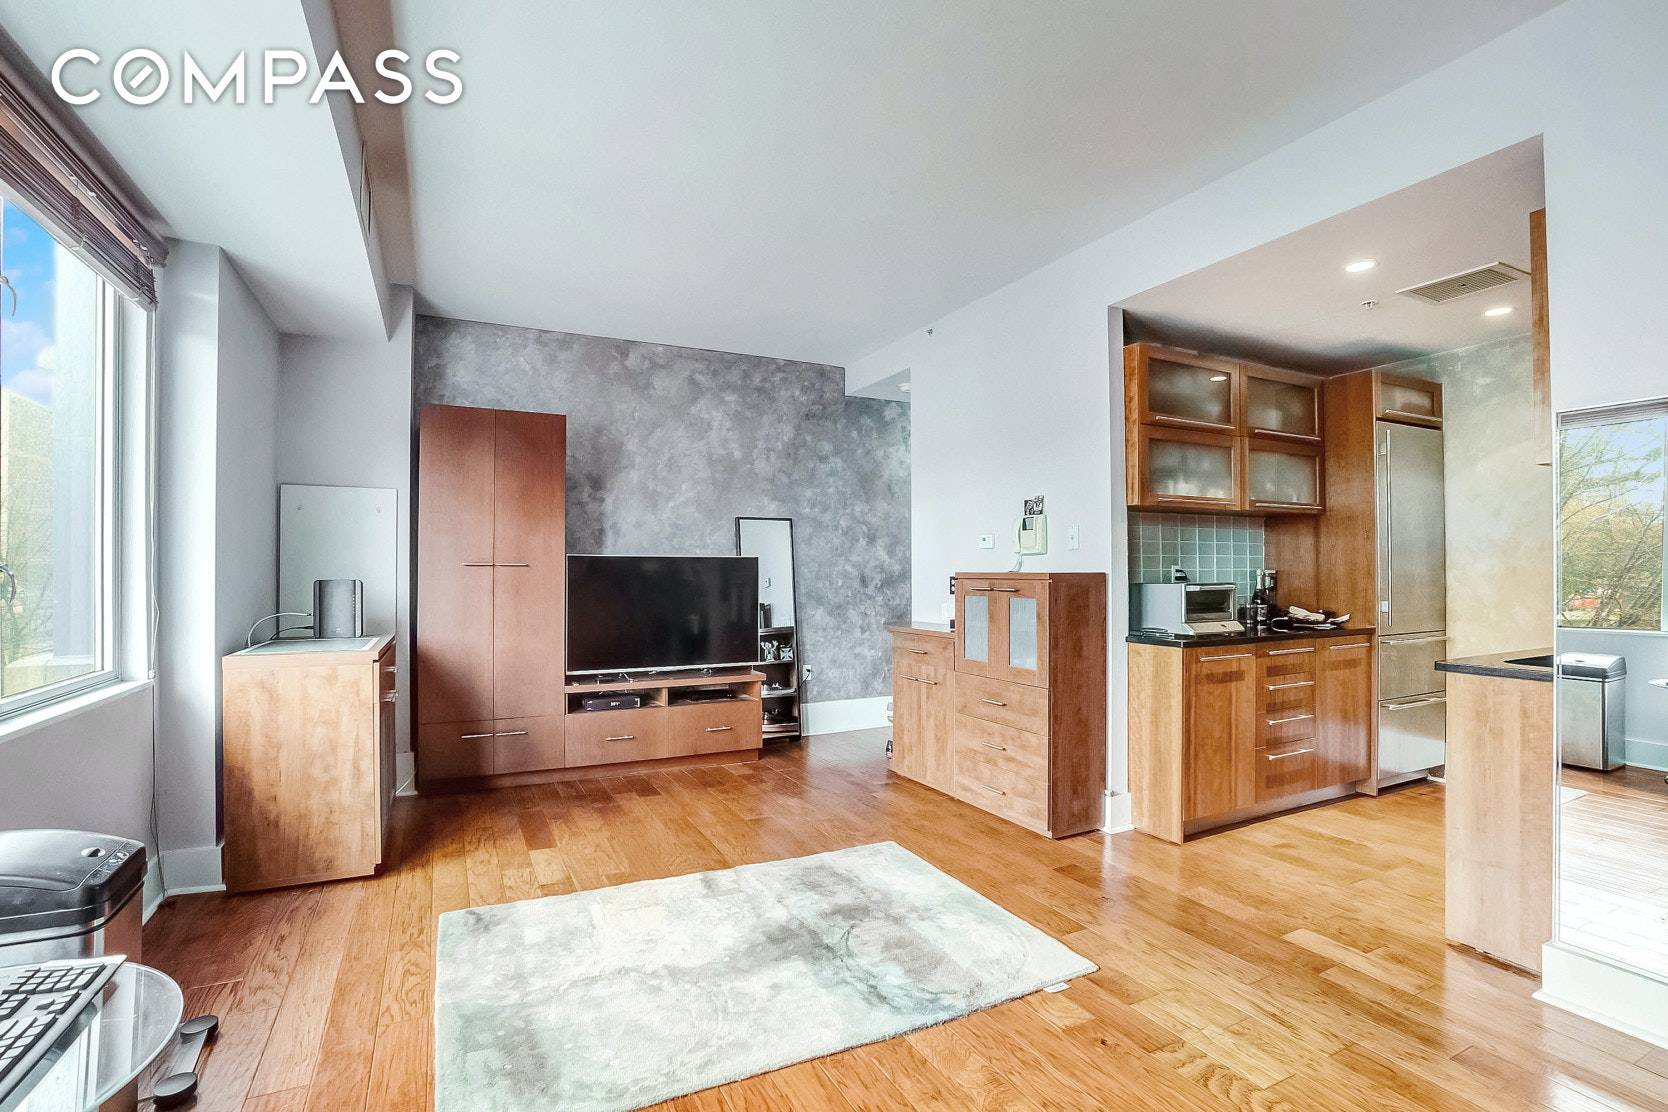 Welcome to unit 2B at 415 Leonard Street, this studio condo over looks McCarren Park and comes with a deeded parking space.